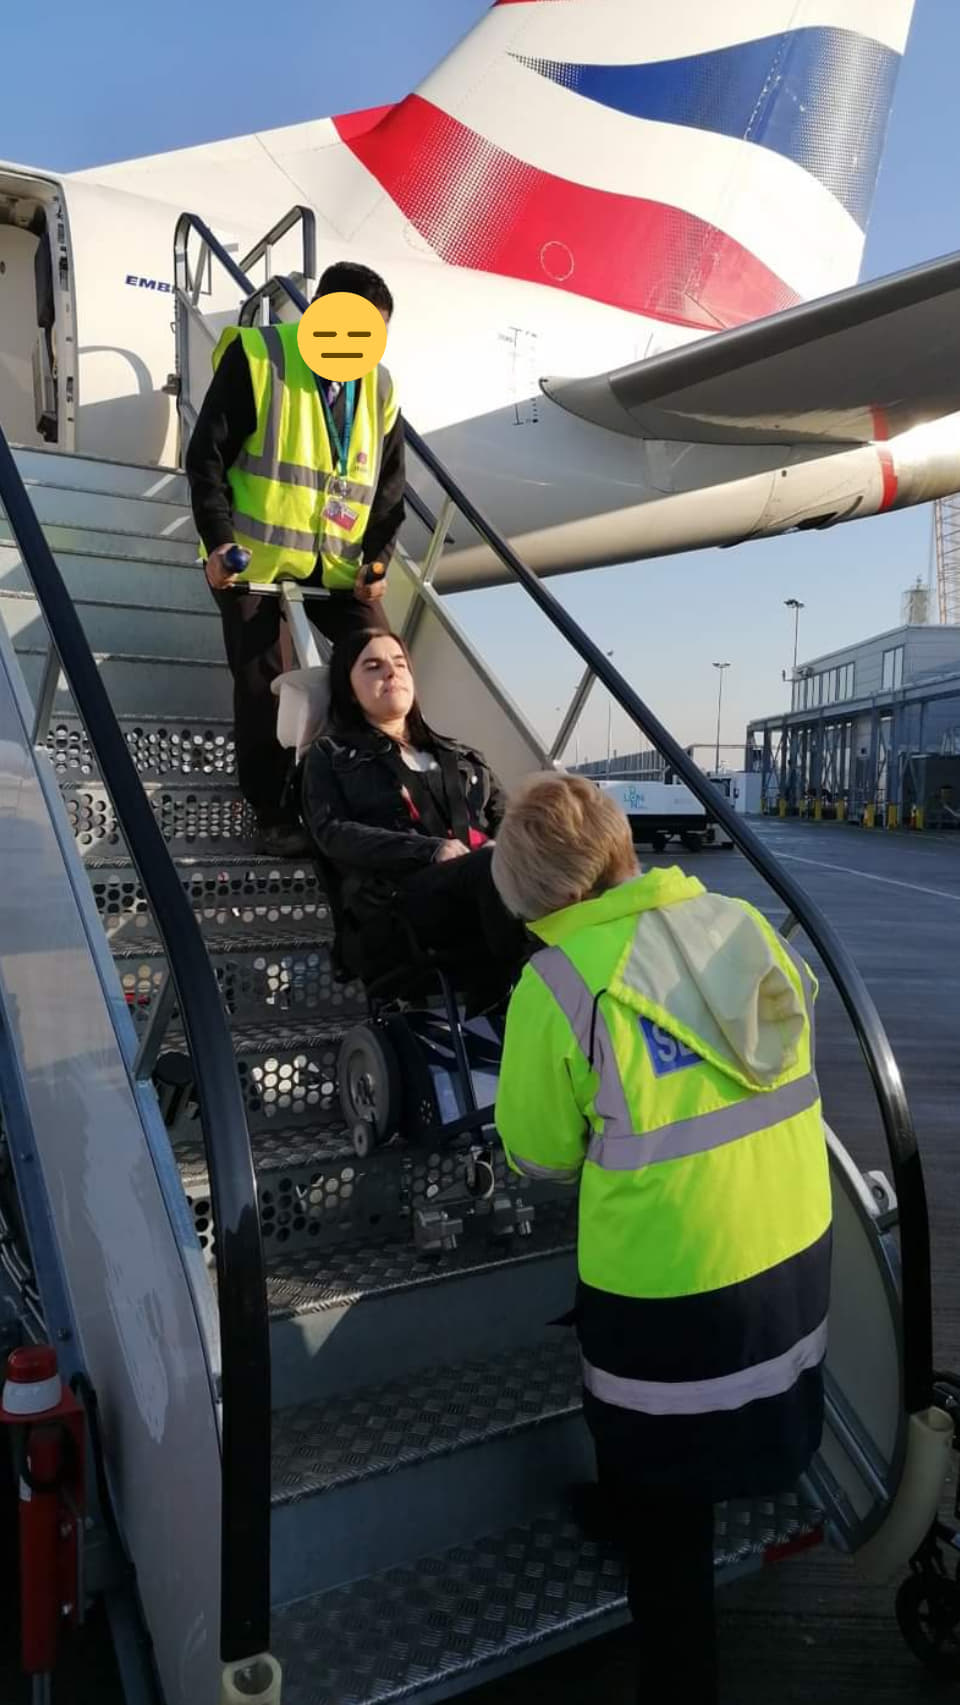 Emma sitting in the stairclimber and being taken down the aircraft stairs with airport staff. This is the view from the bottom of the stairs.